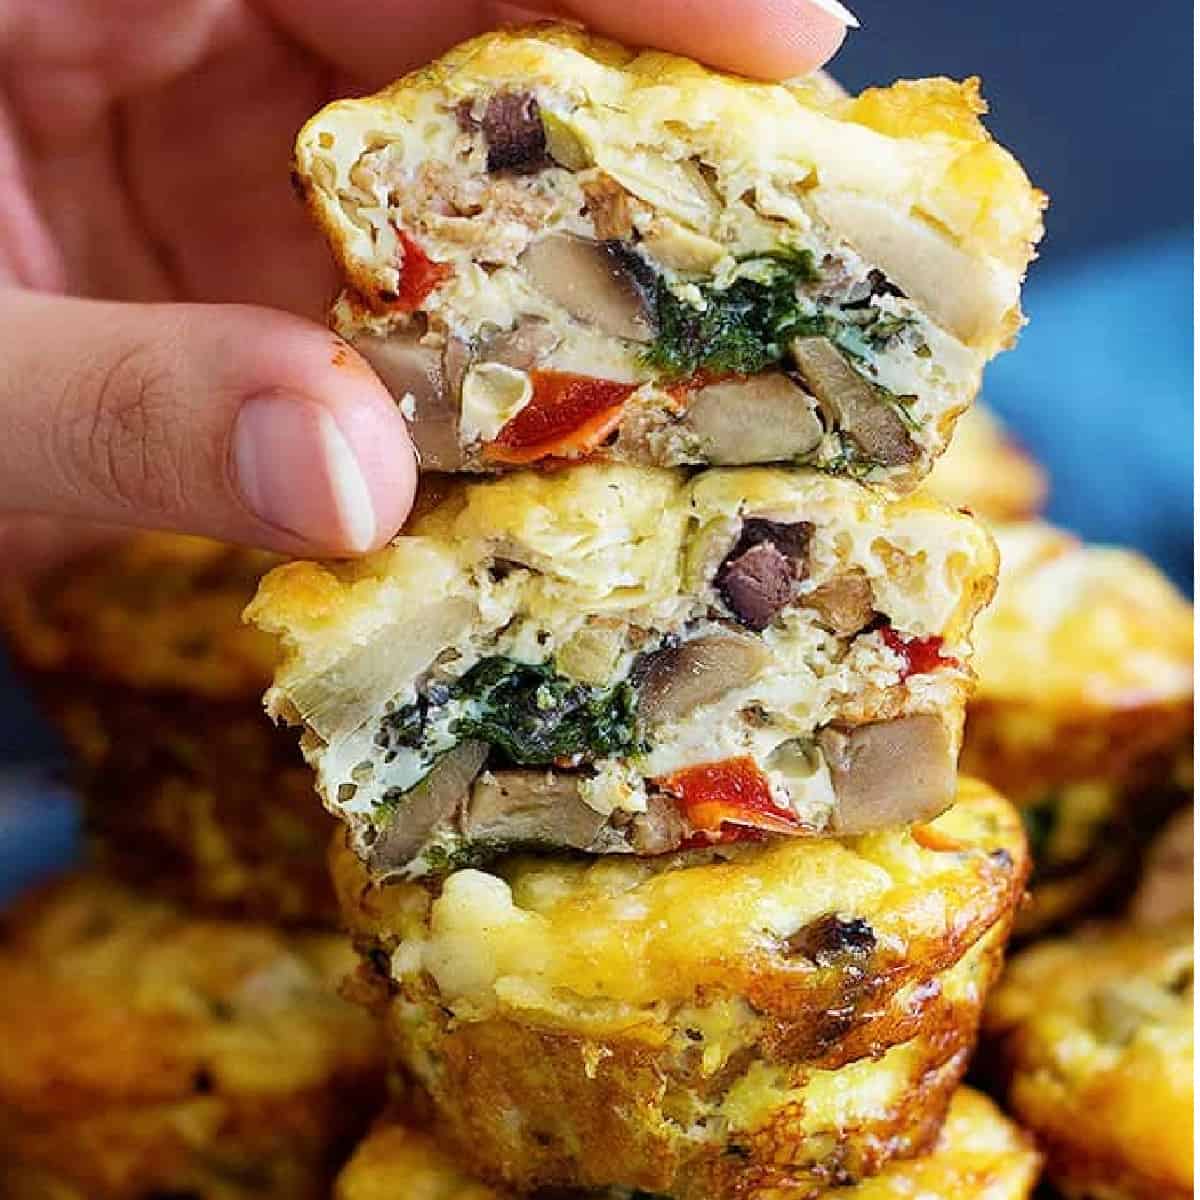 Sausage breakfast muffins come together in no time and are super simple to make. These Breakfast egg muffins are packed with tasty sausage and vegetables! 
